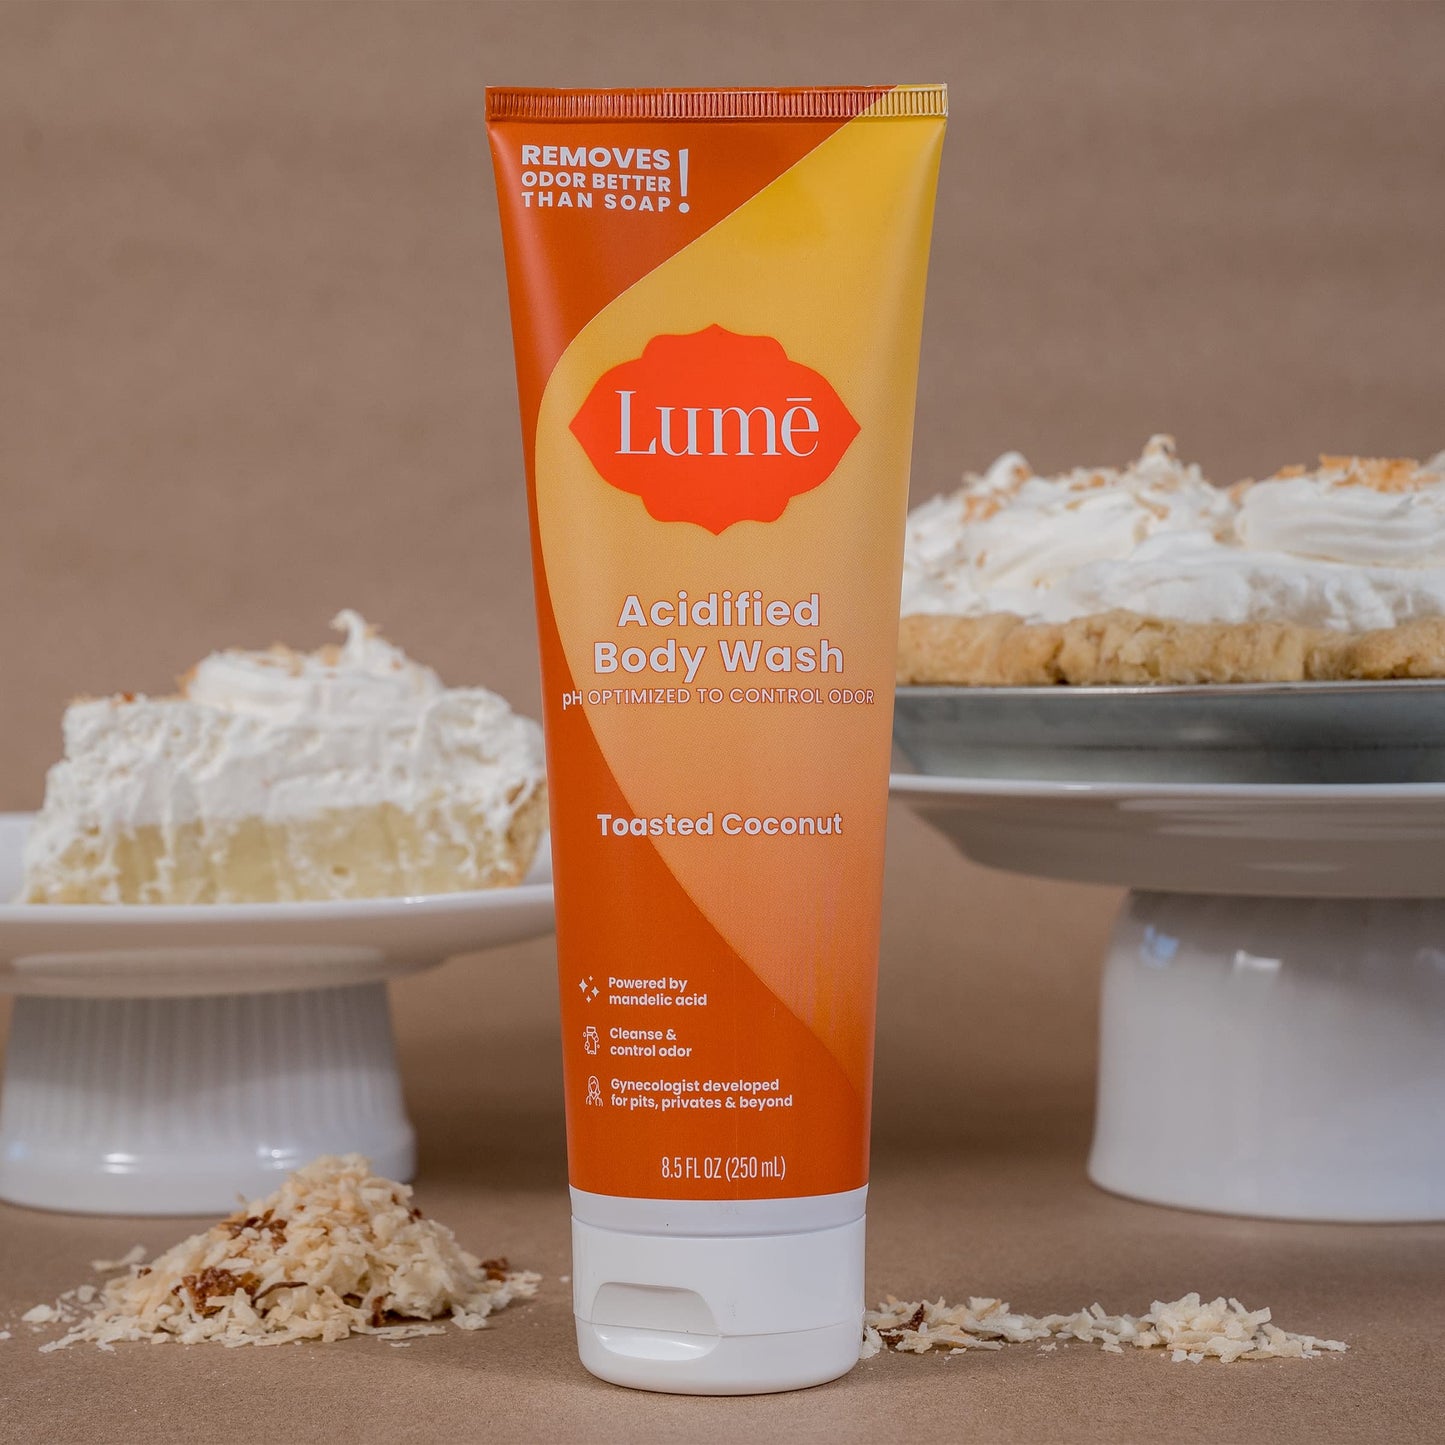 Lume Acidified Body Wash - 24 Hour Odor Control - Removes Odor Better than Soap - Moisturizing Formula - SLS Free, Paraben Free - Safe For Sensitive Skin - 8.5 ounce (Toasted Coconut)